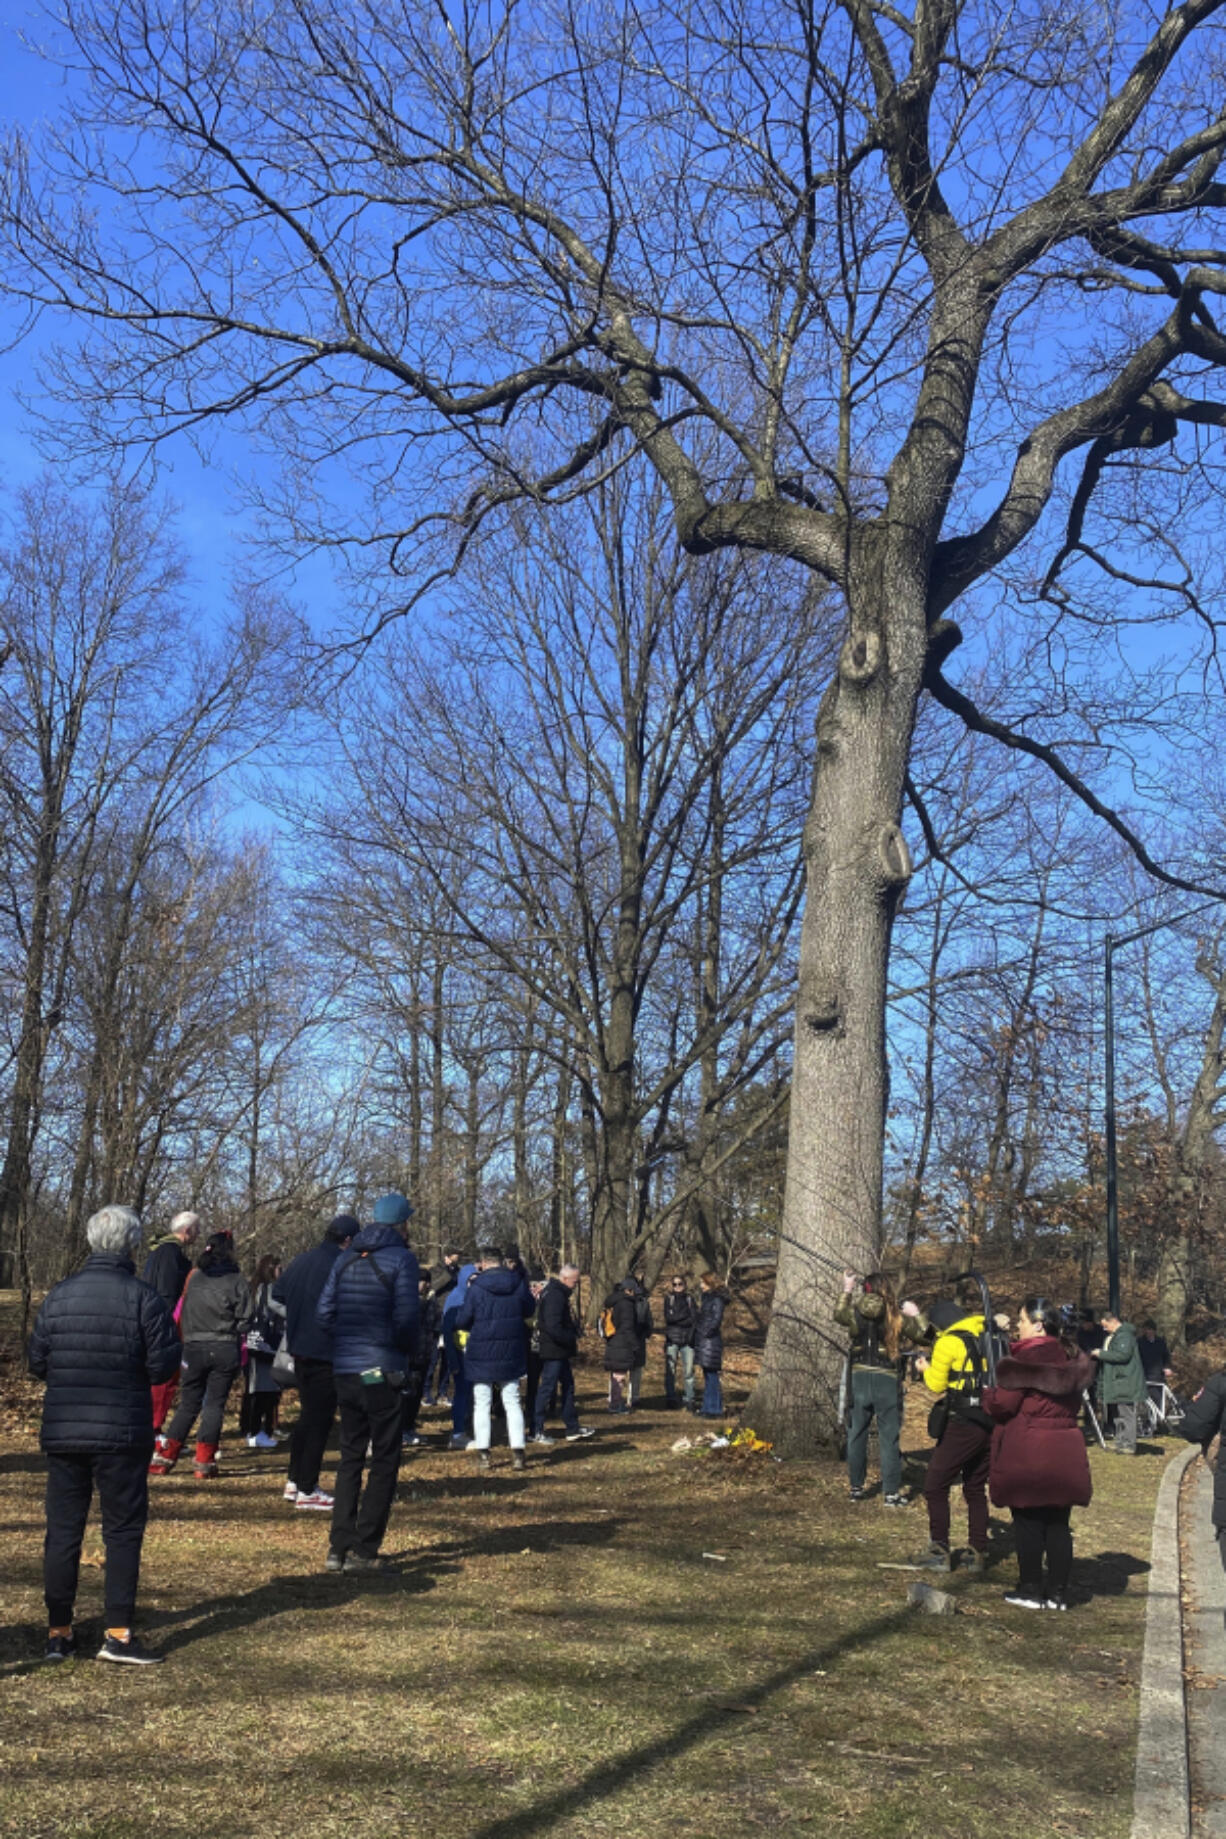 People gather in tribute to Flaco on Saturday at the foot of the oak tree where the owl was often spotted in New York&rsquo;s Central Park.